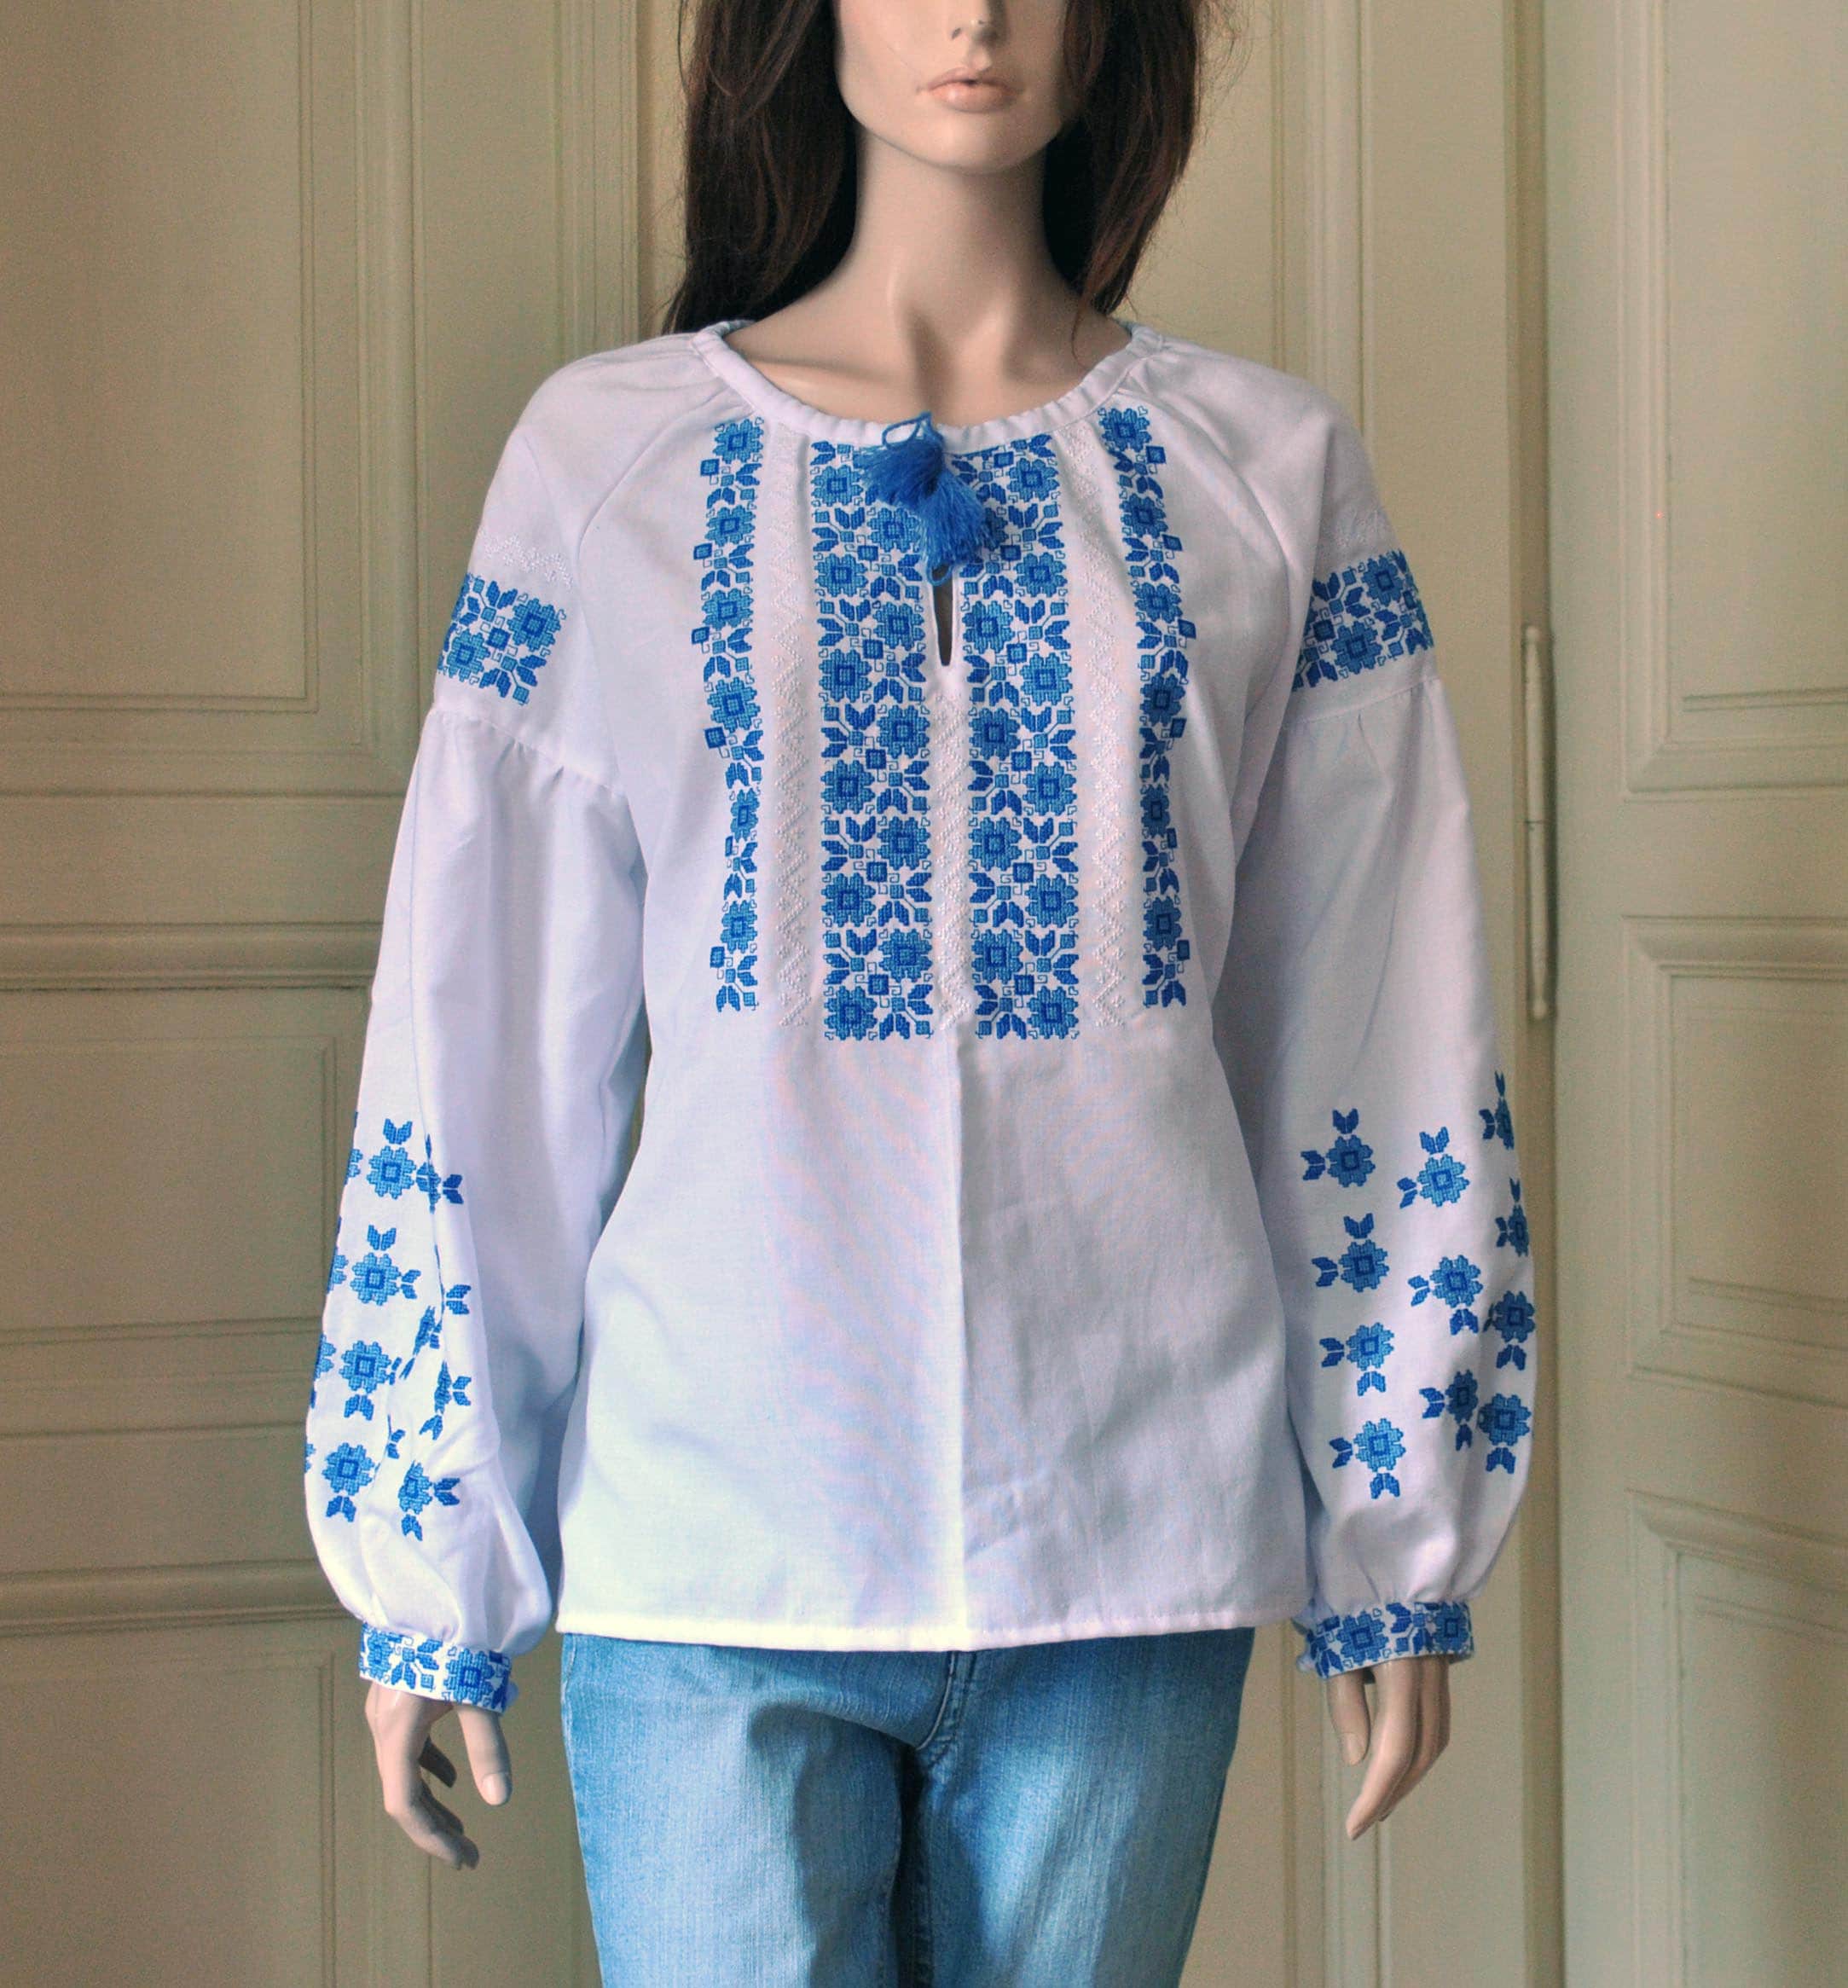 Ukrainian Embroidered Shirt With Flowers Cross Stich | Etsy